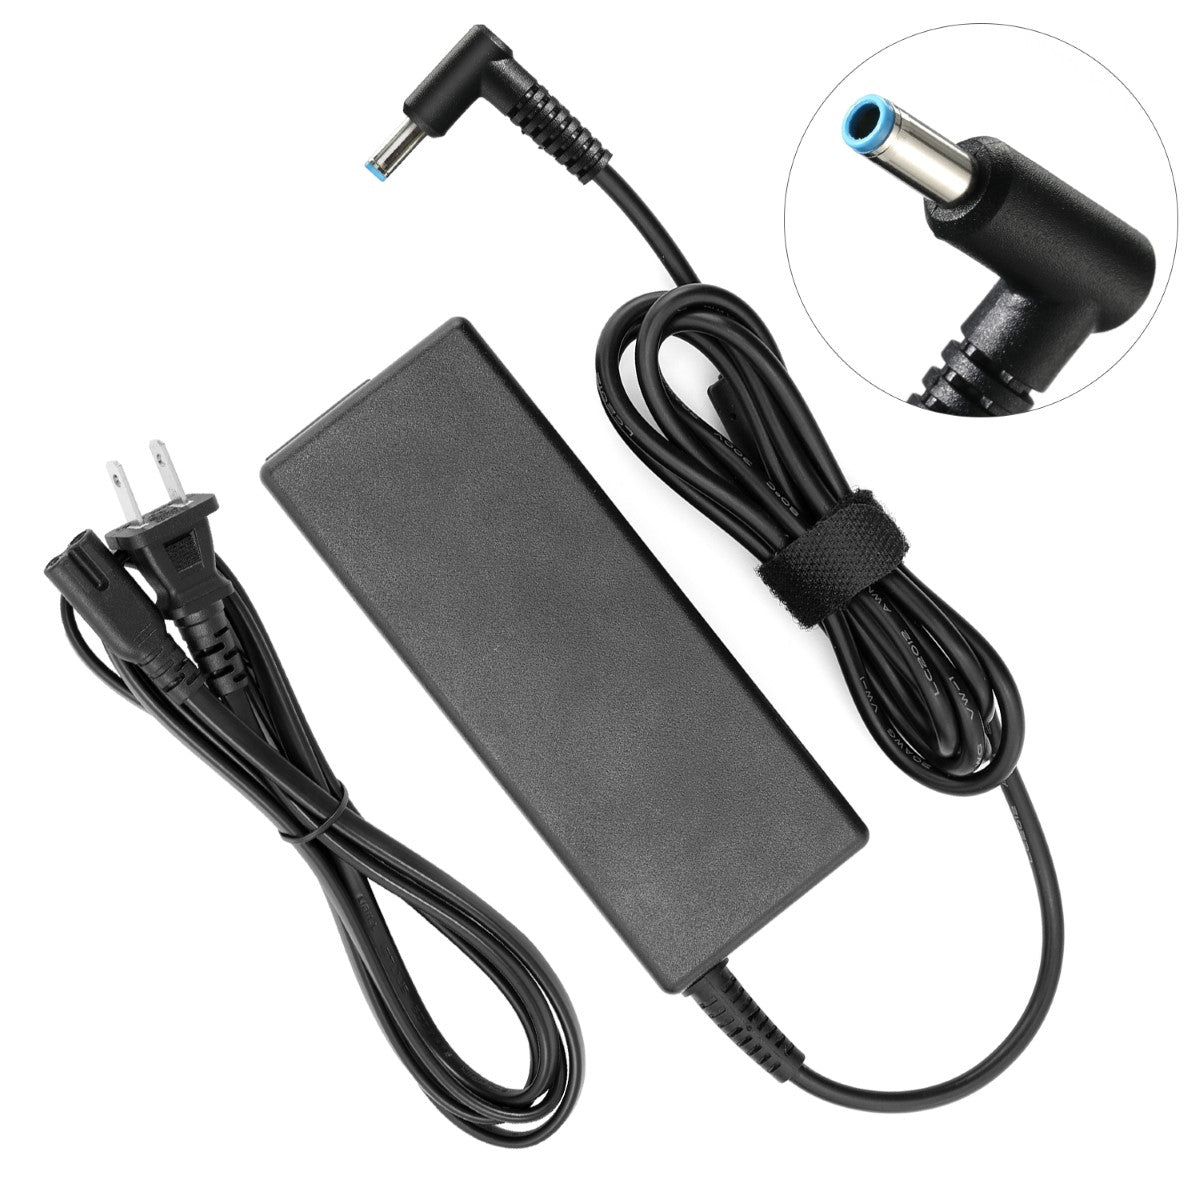 Charger for HP Stream 11-p015wm x360 Convertible Laptop